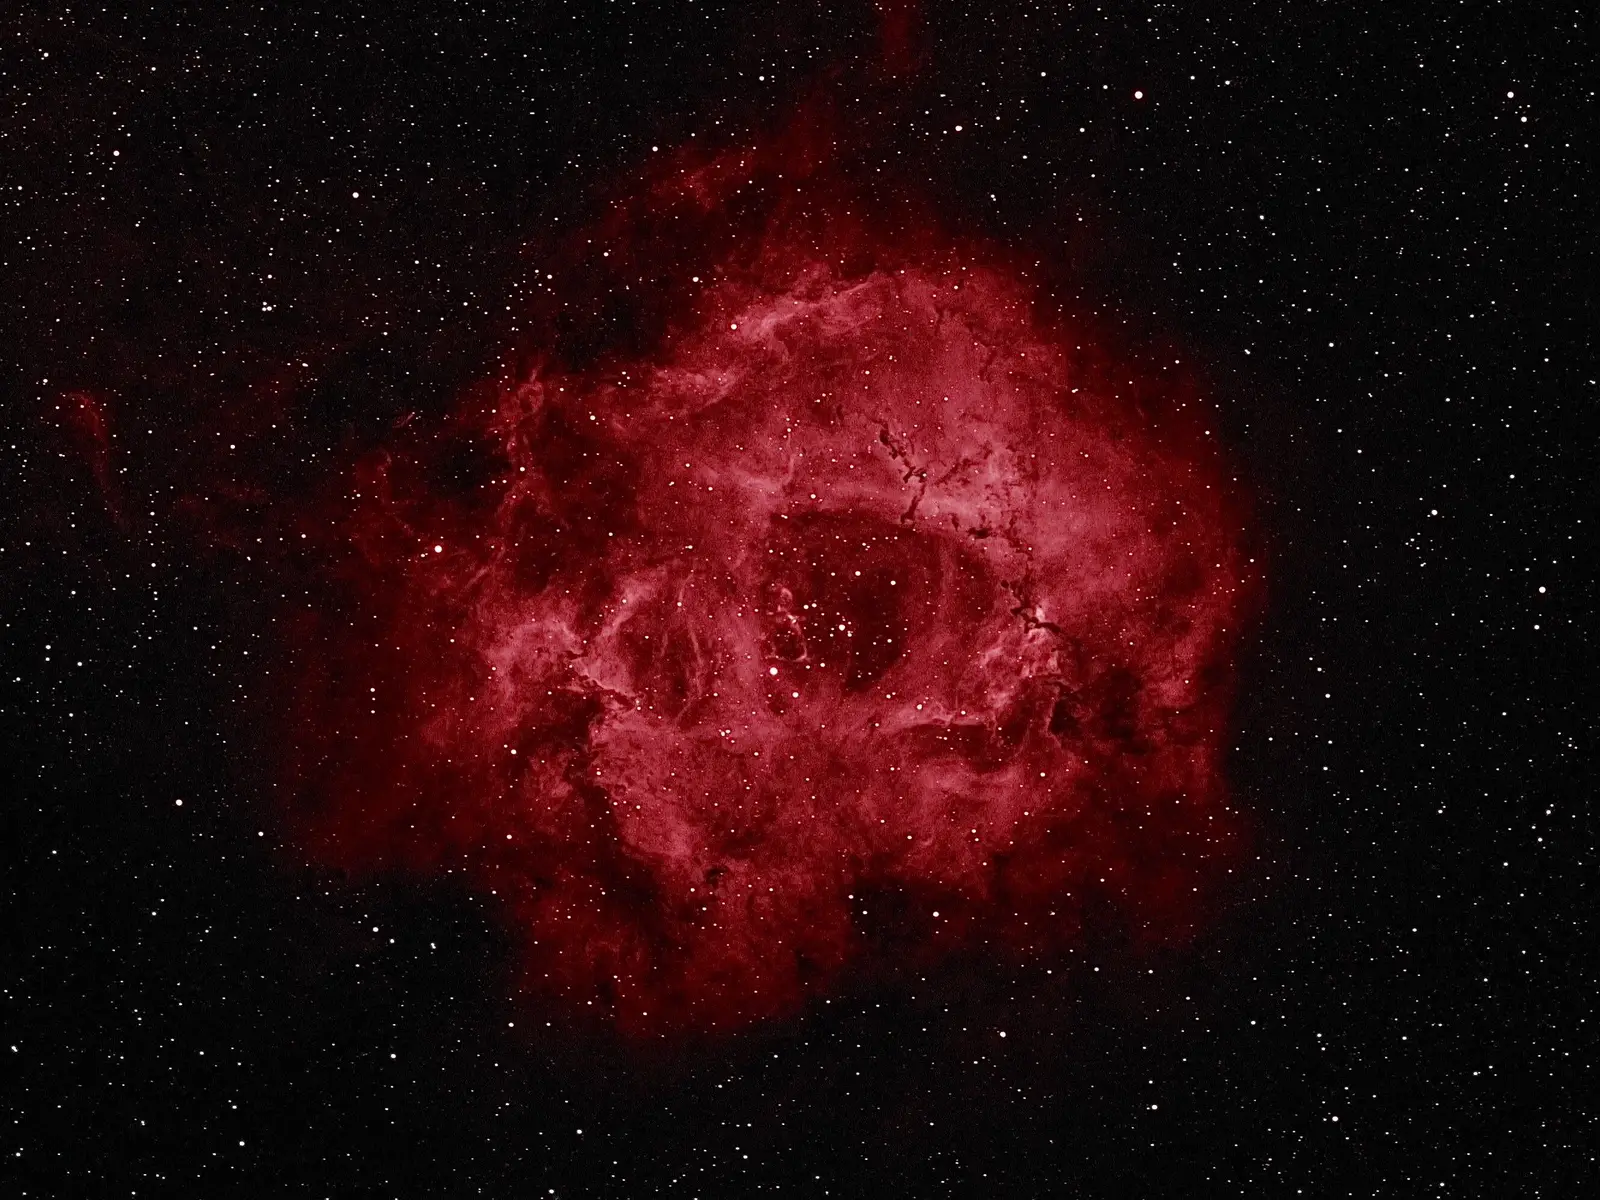 The Rosette Nebula is a huge star-forming region spanning 100 lightyears across and located 5,000 lightyears away. It can be seen in the Monoceros constellation in the winter months, located between stars Betelgeuse and Procyon. #spacetok #astronomy #space #spacetok #astro7e